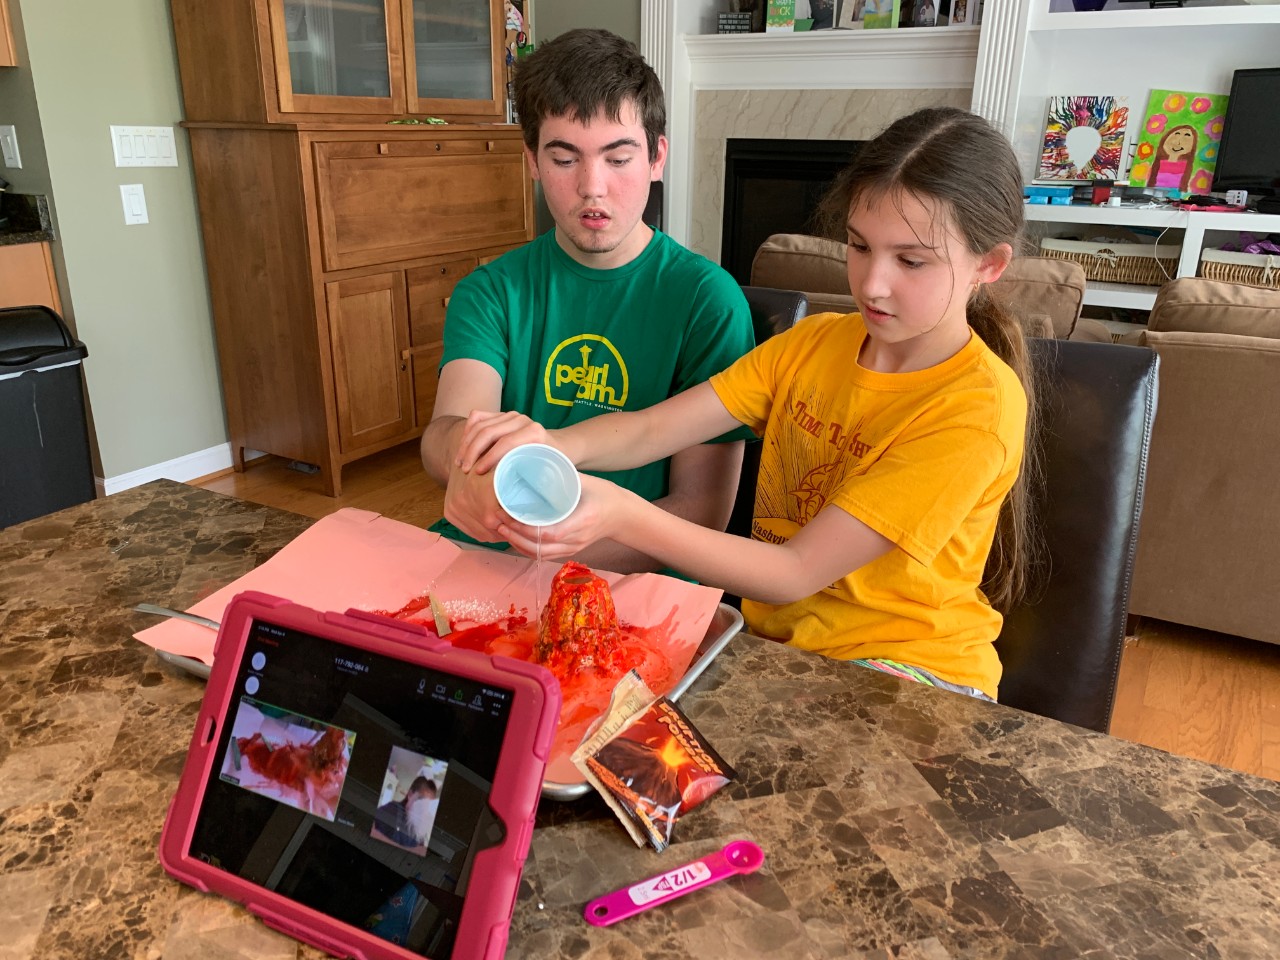 The two siblings sit at a kitchen counter and do a science experiment with a model volcano.